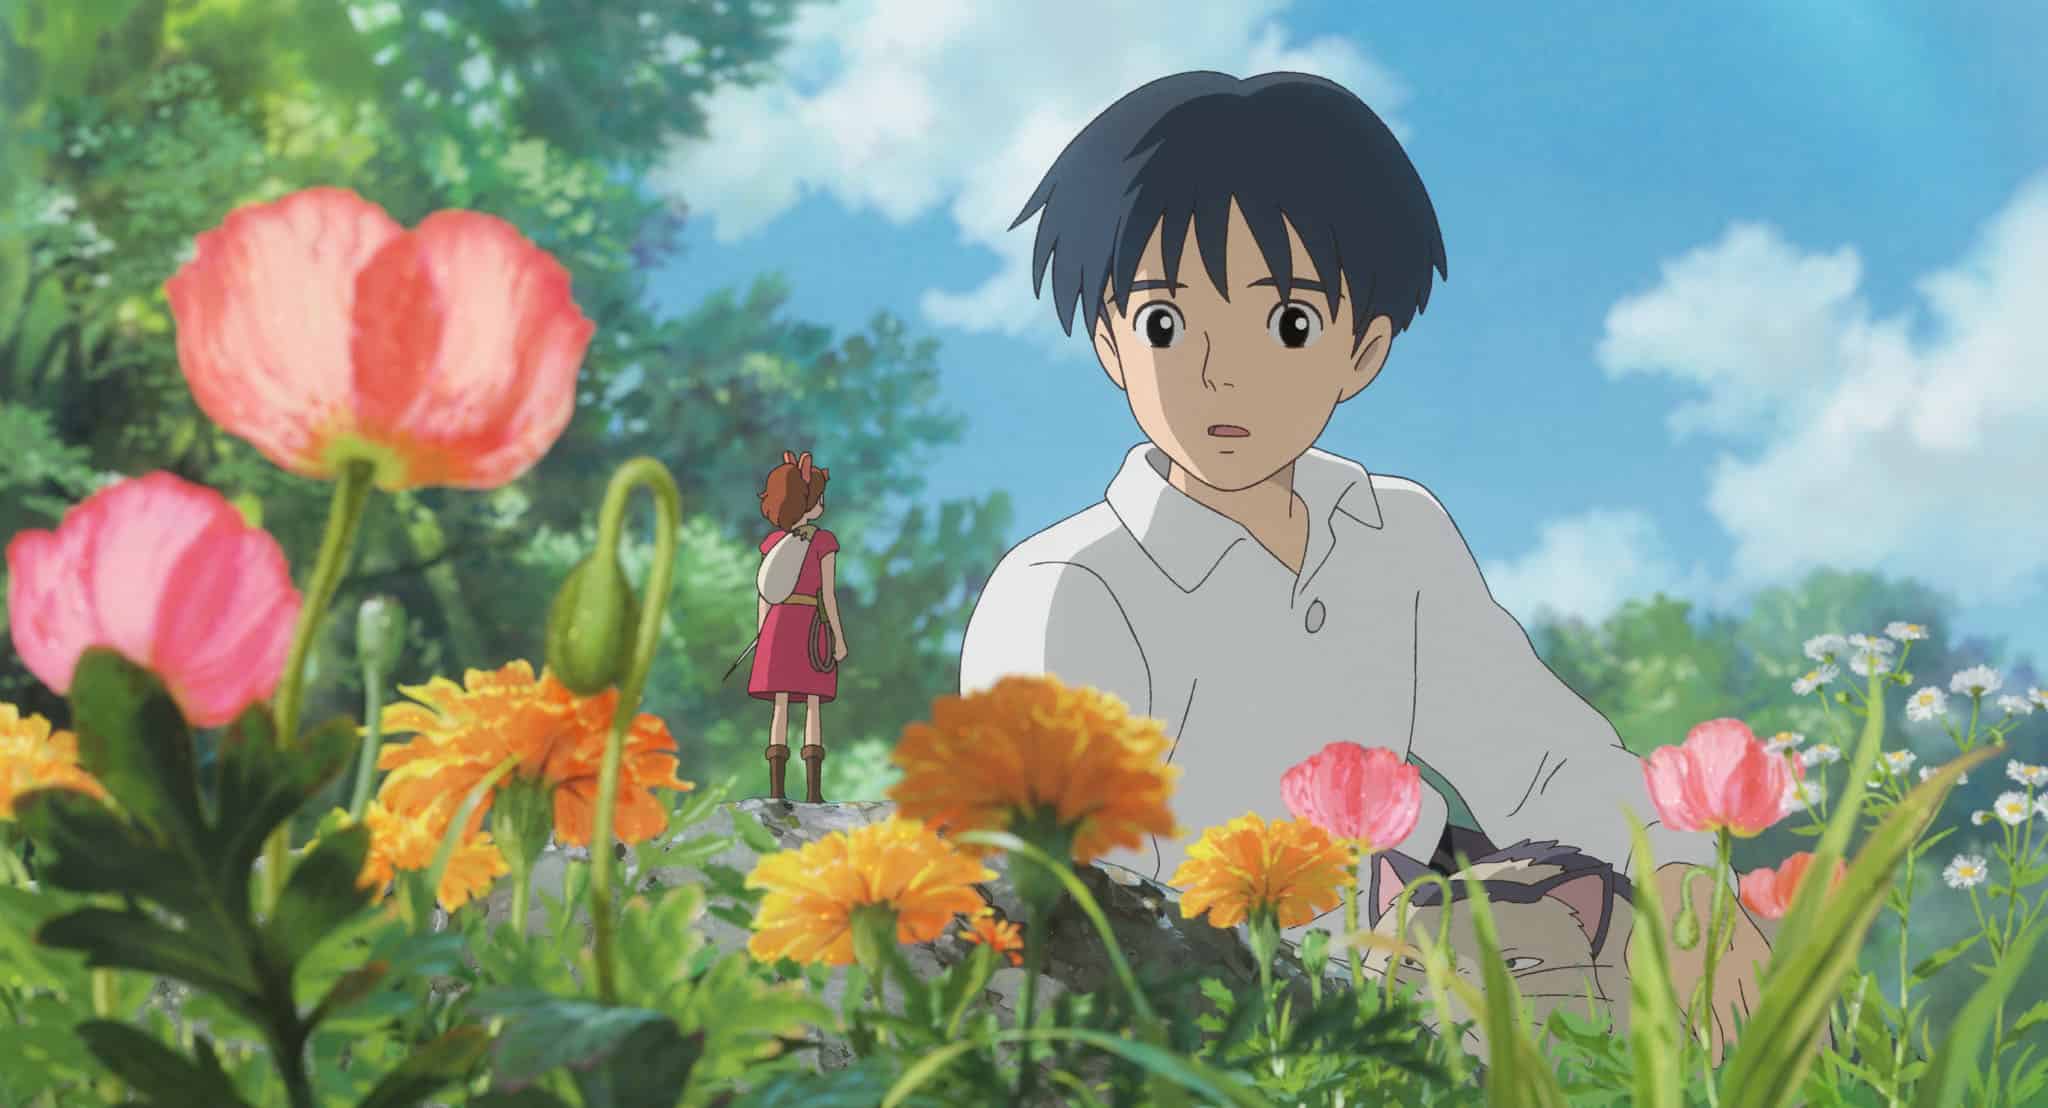 An animated boy talks to a miniature girl in this image from Studio Ghibli.